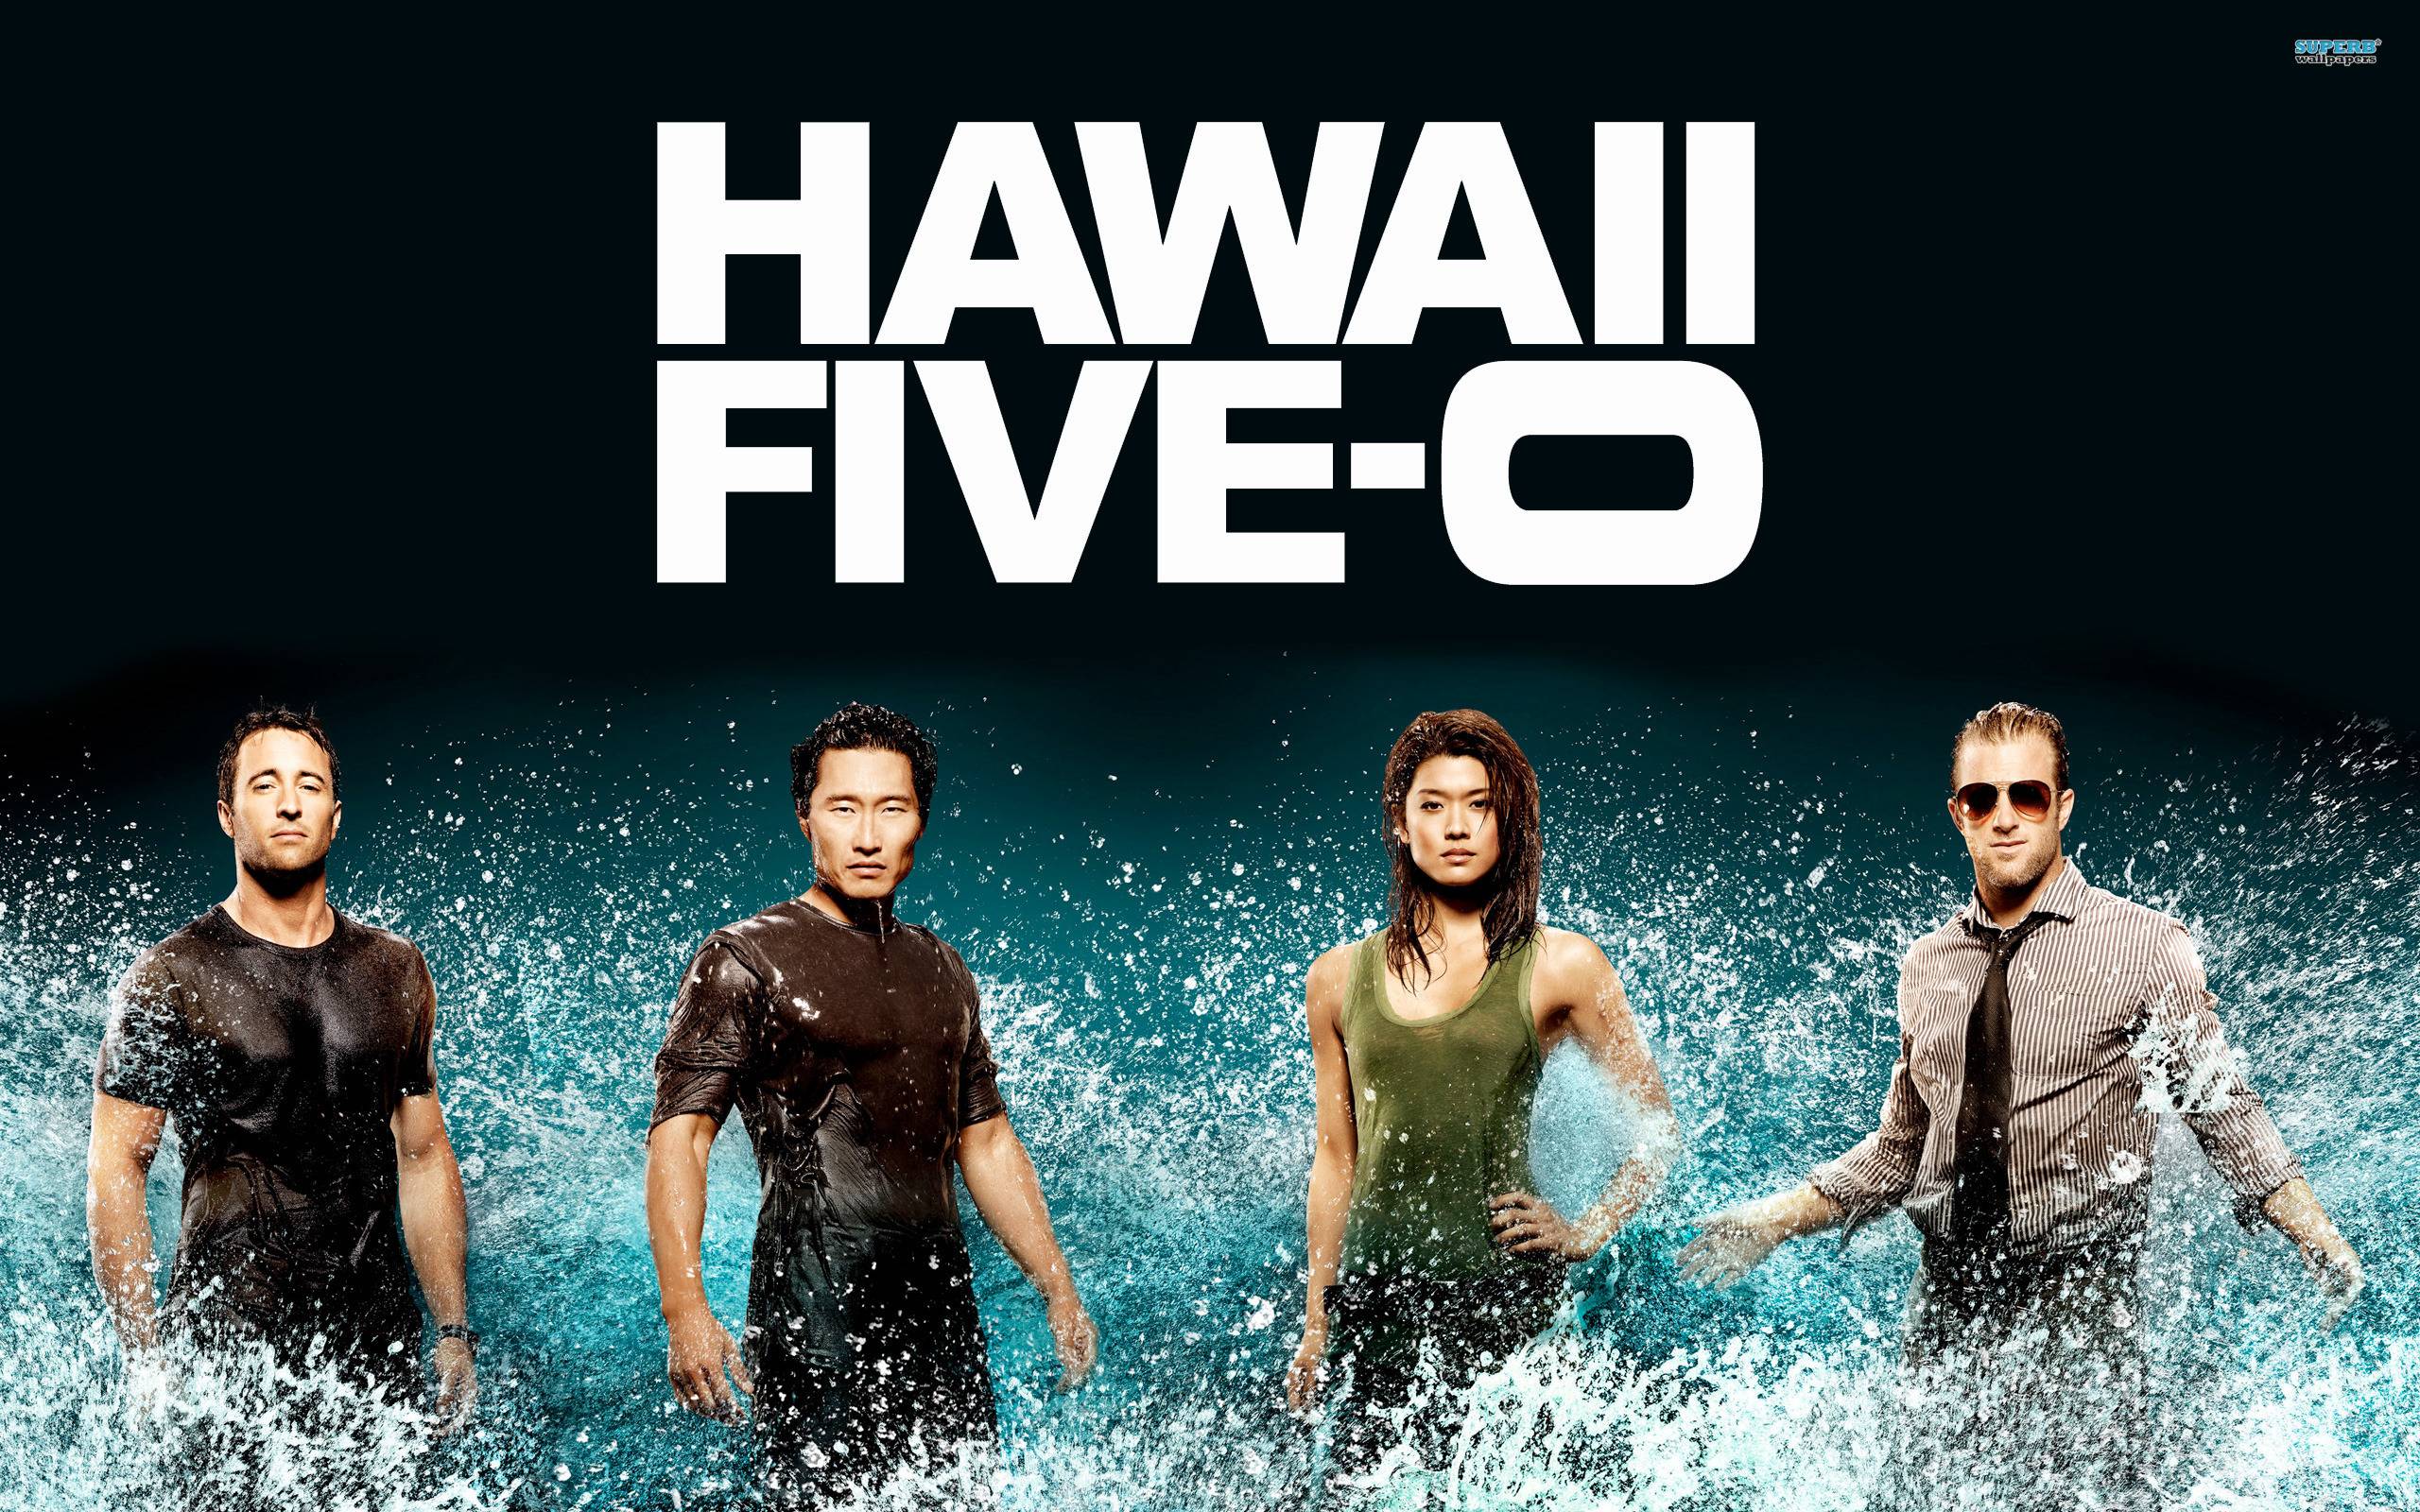 Hawaii Five-0 Pics, TV Show Collection